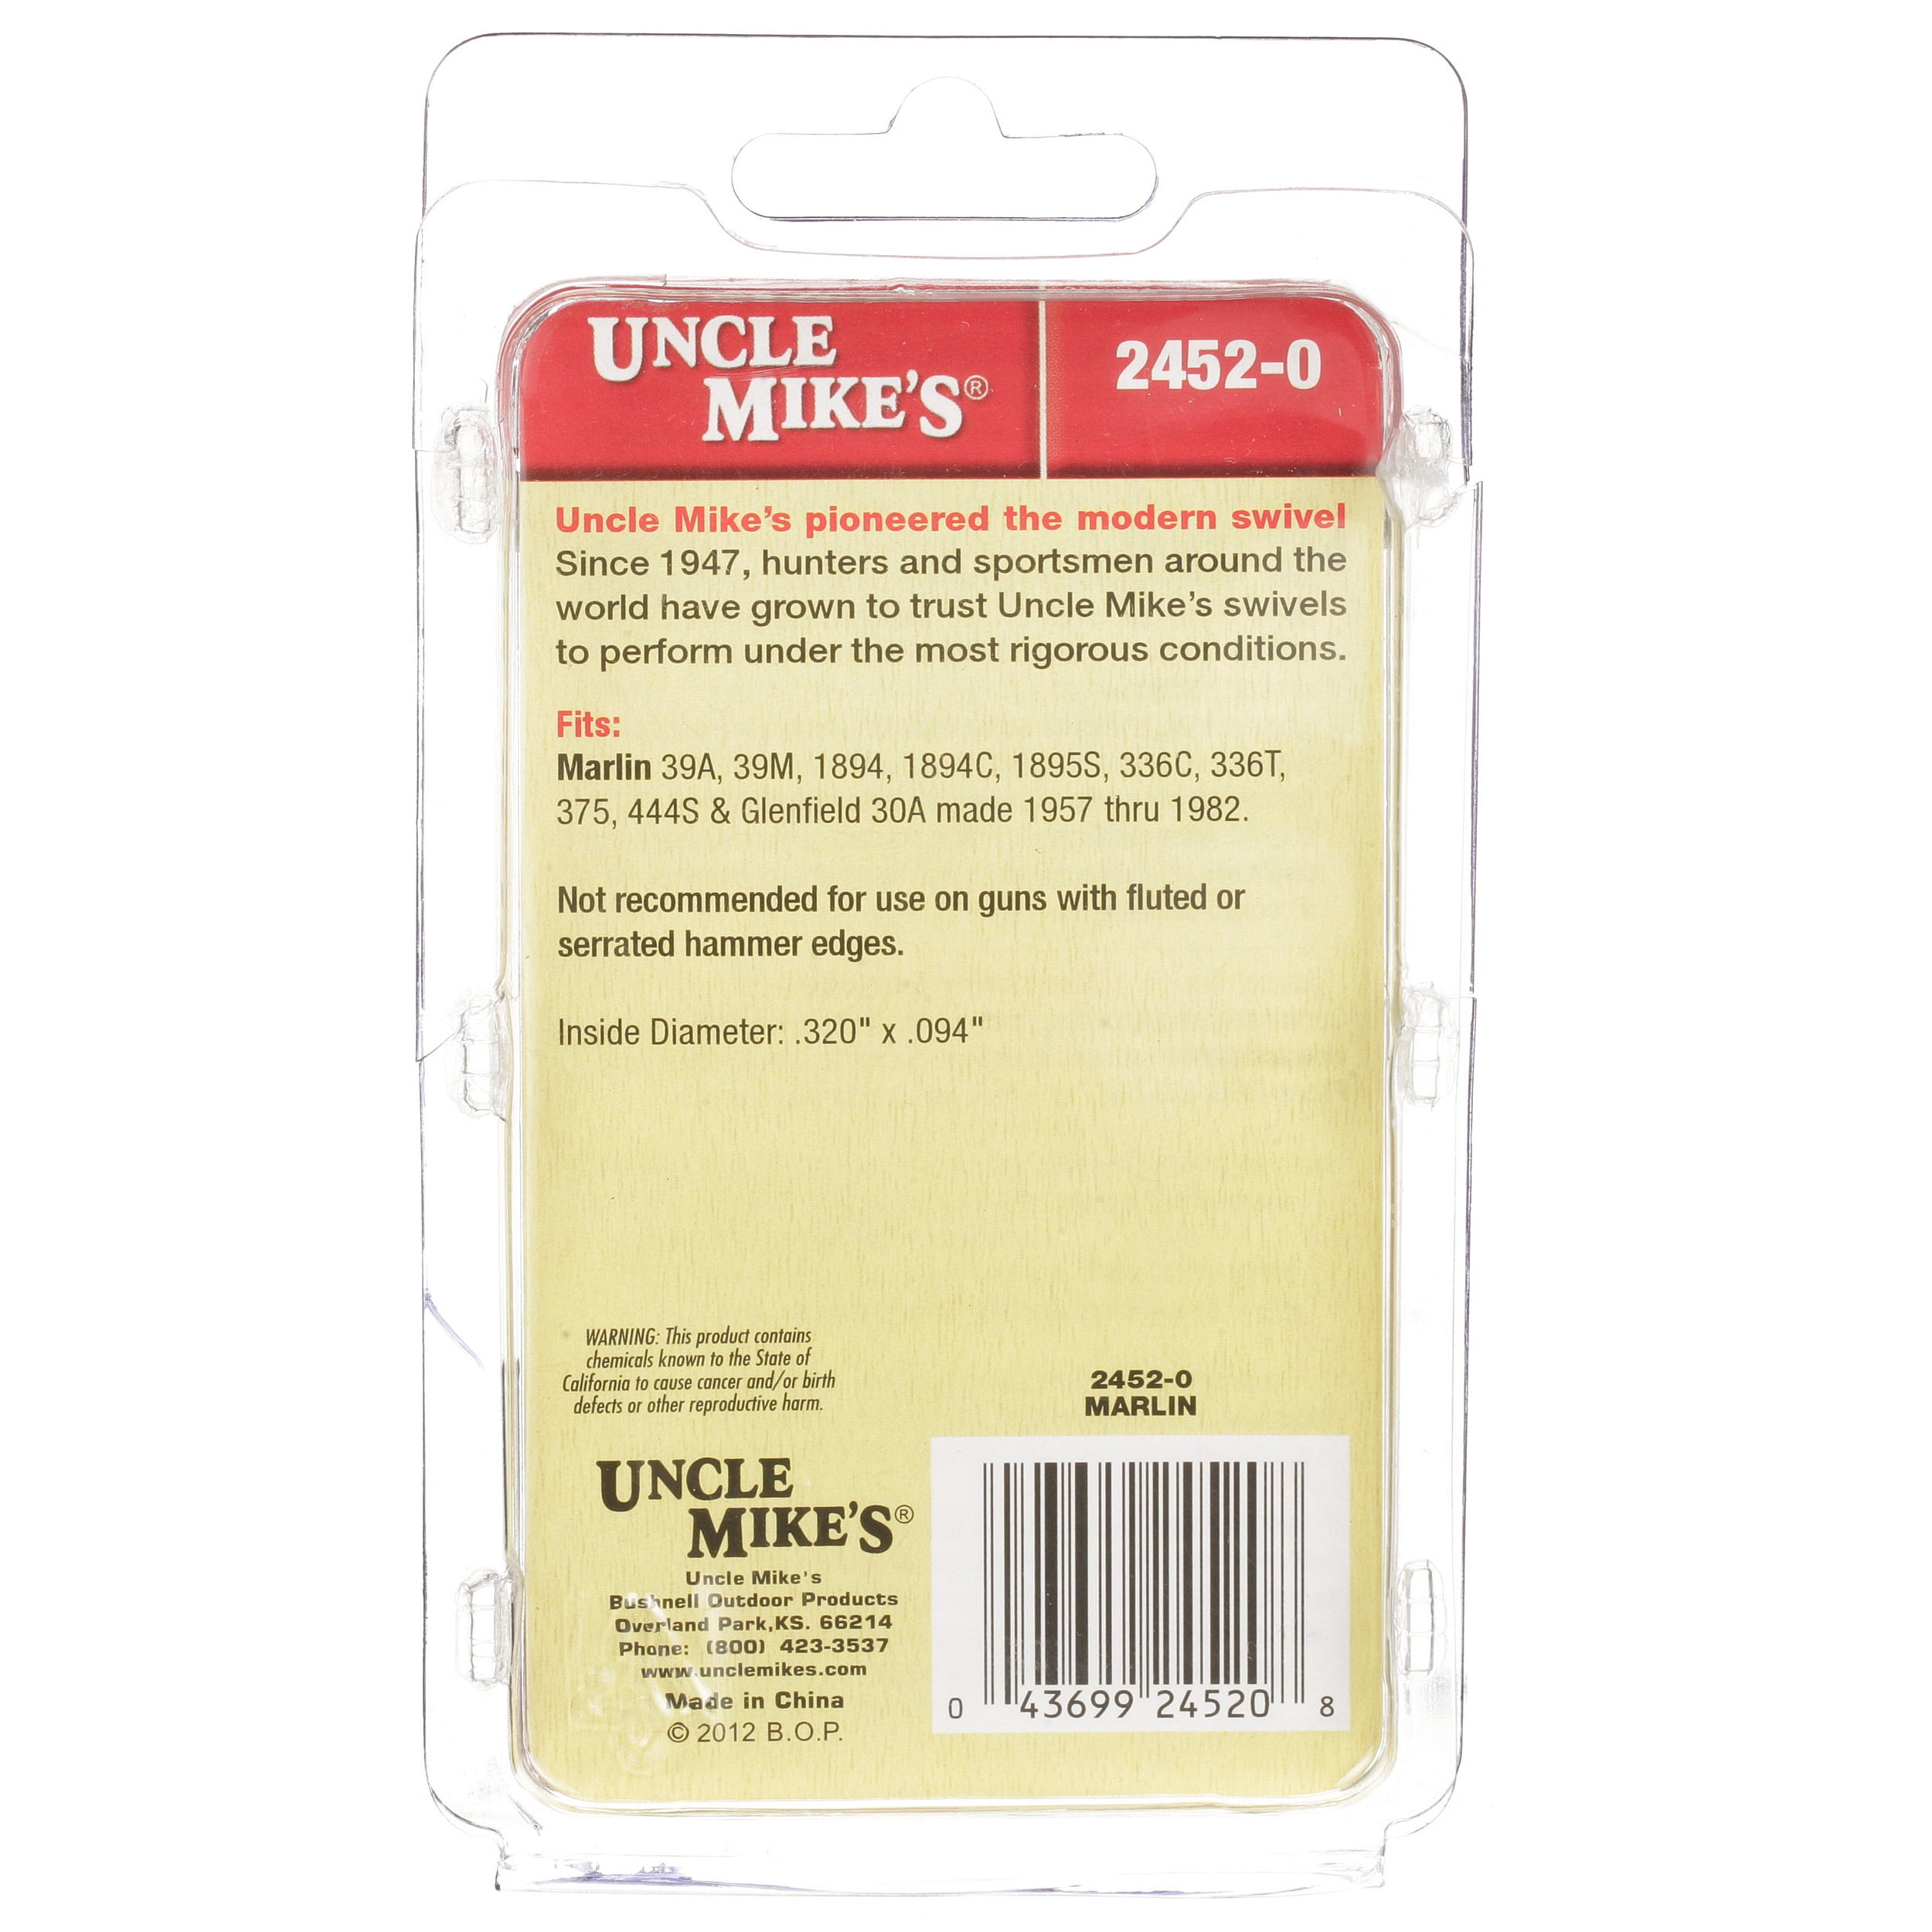 UNCLE MIKE/'S 2456-0 HAMMER EXTENSION X90076-2*K